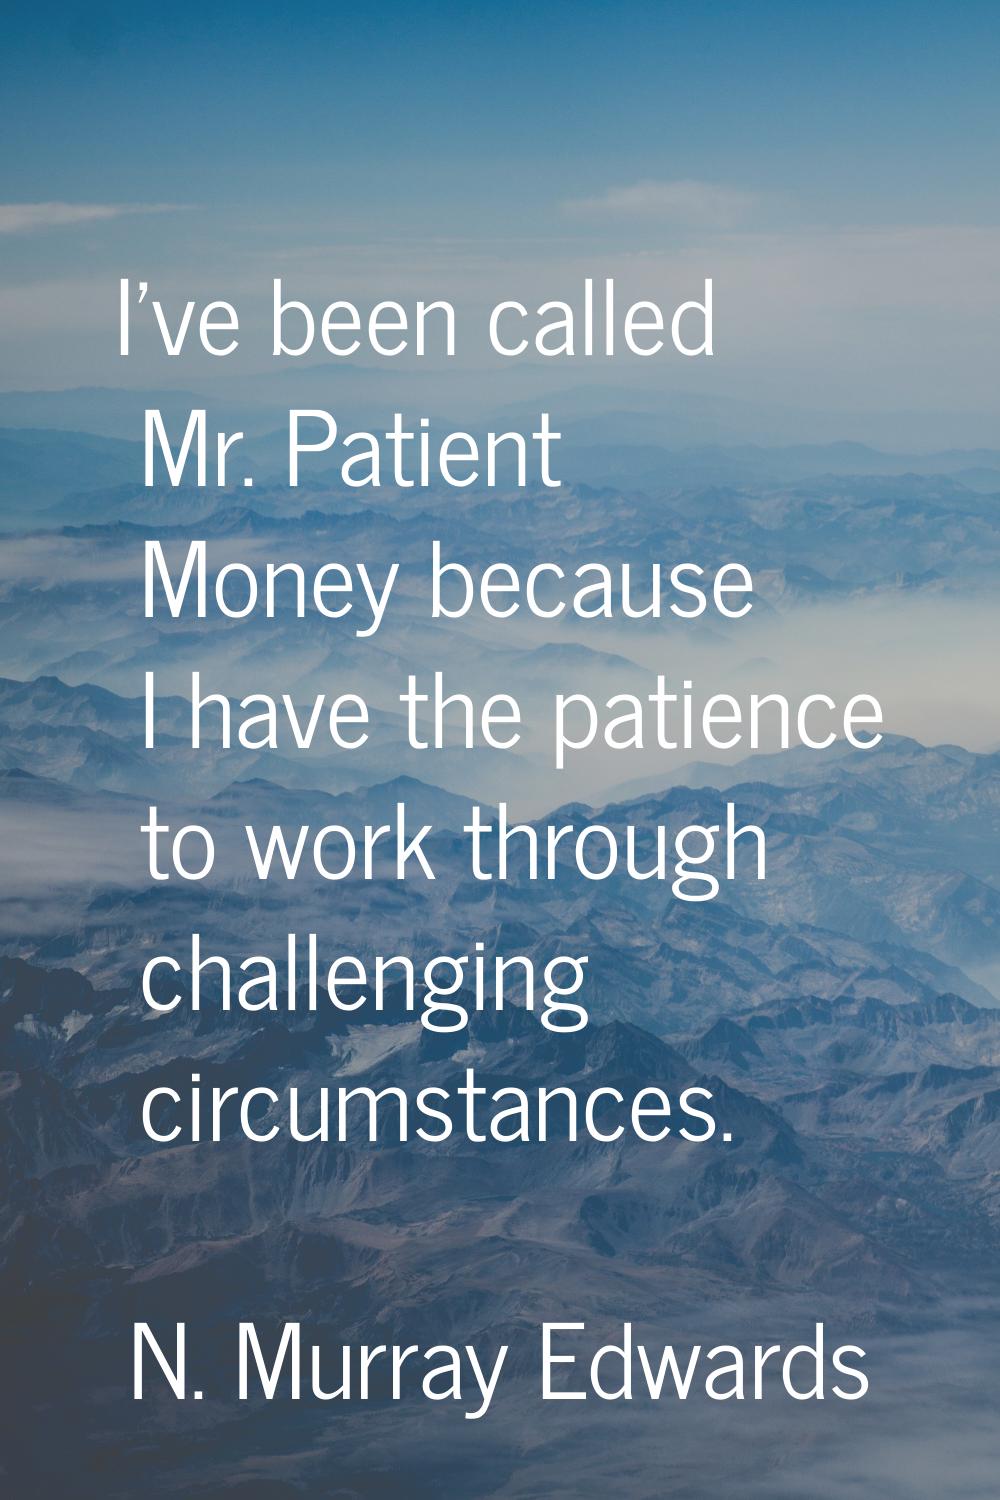 I've been called Mr. Patient Money because I have the patience to work through challenging circumst